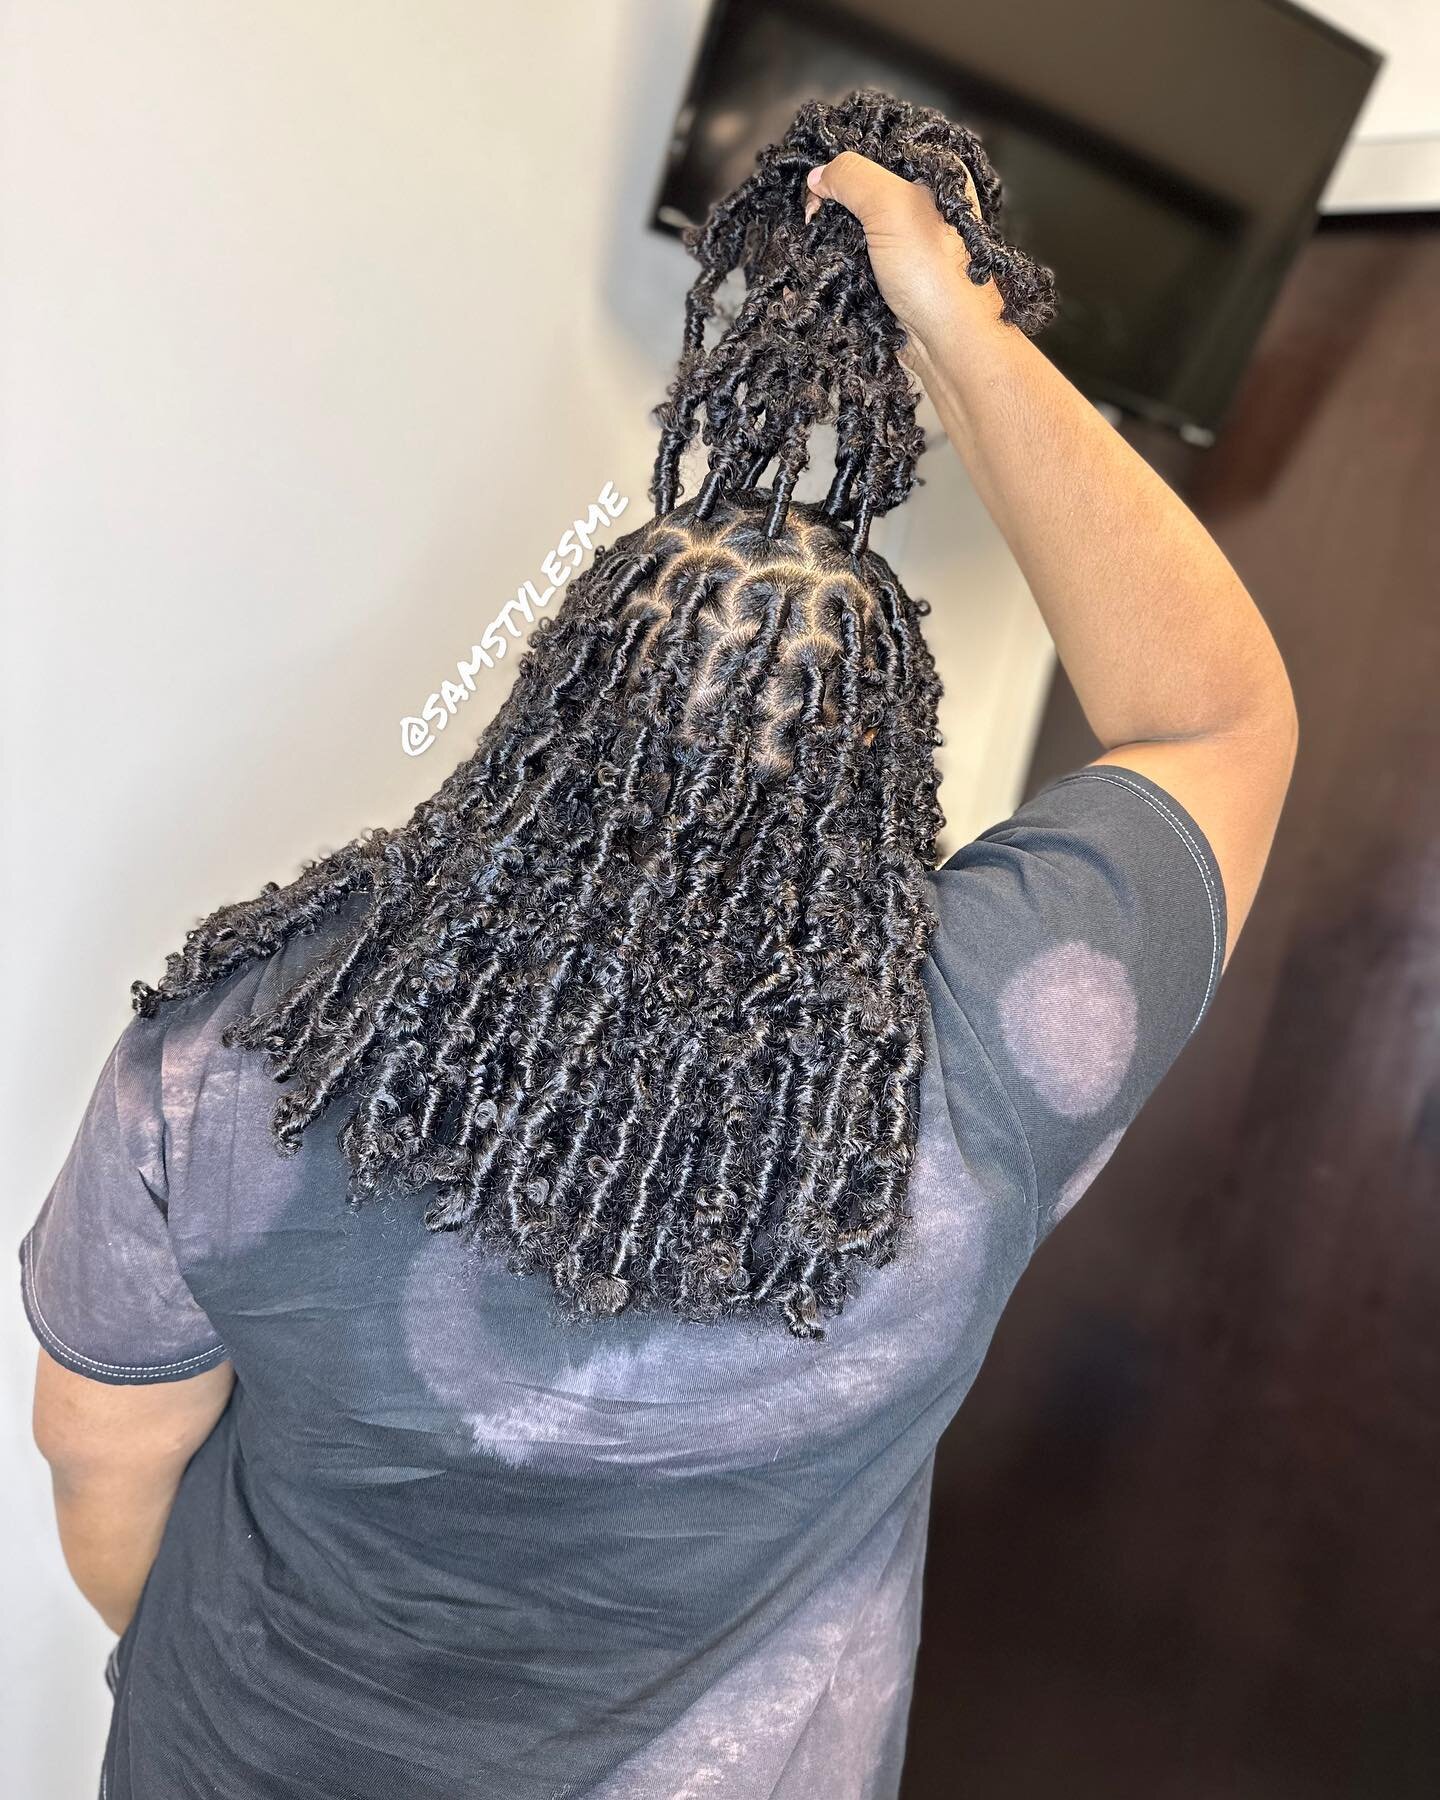 Butterfly locs 🦋 go book your appointment this is one of my favorite styles to do #samstylesme #cltbutterflylocs #charlottebraids #charlottebraider #charlotteprotectivestyles #butterflylocs